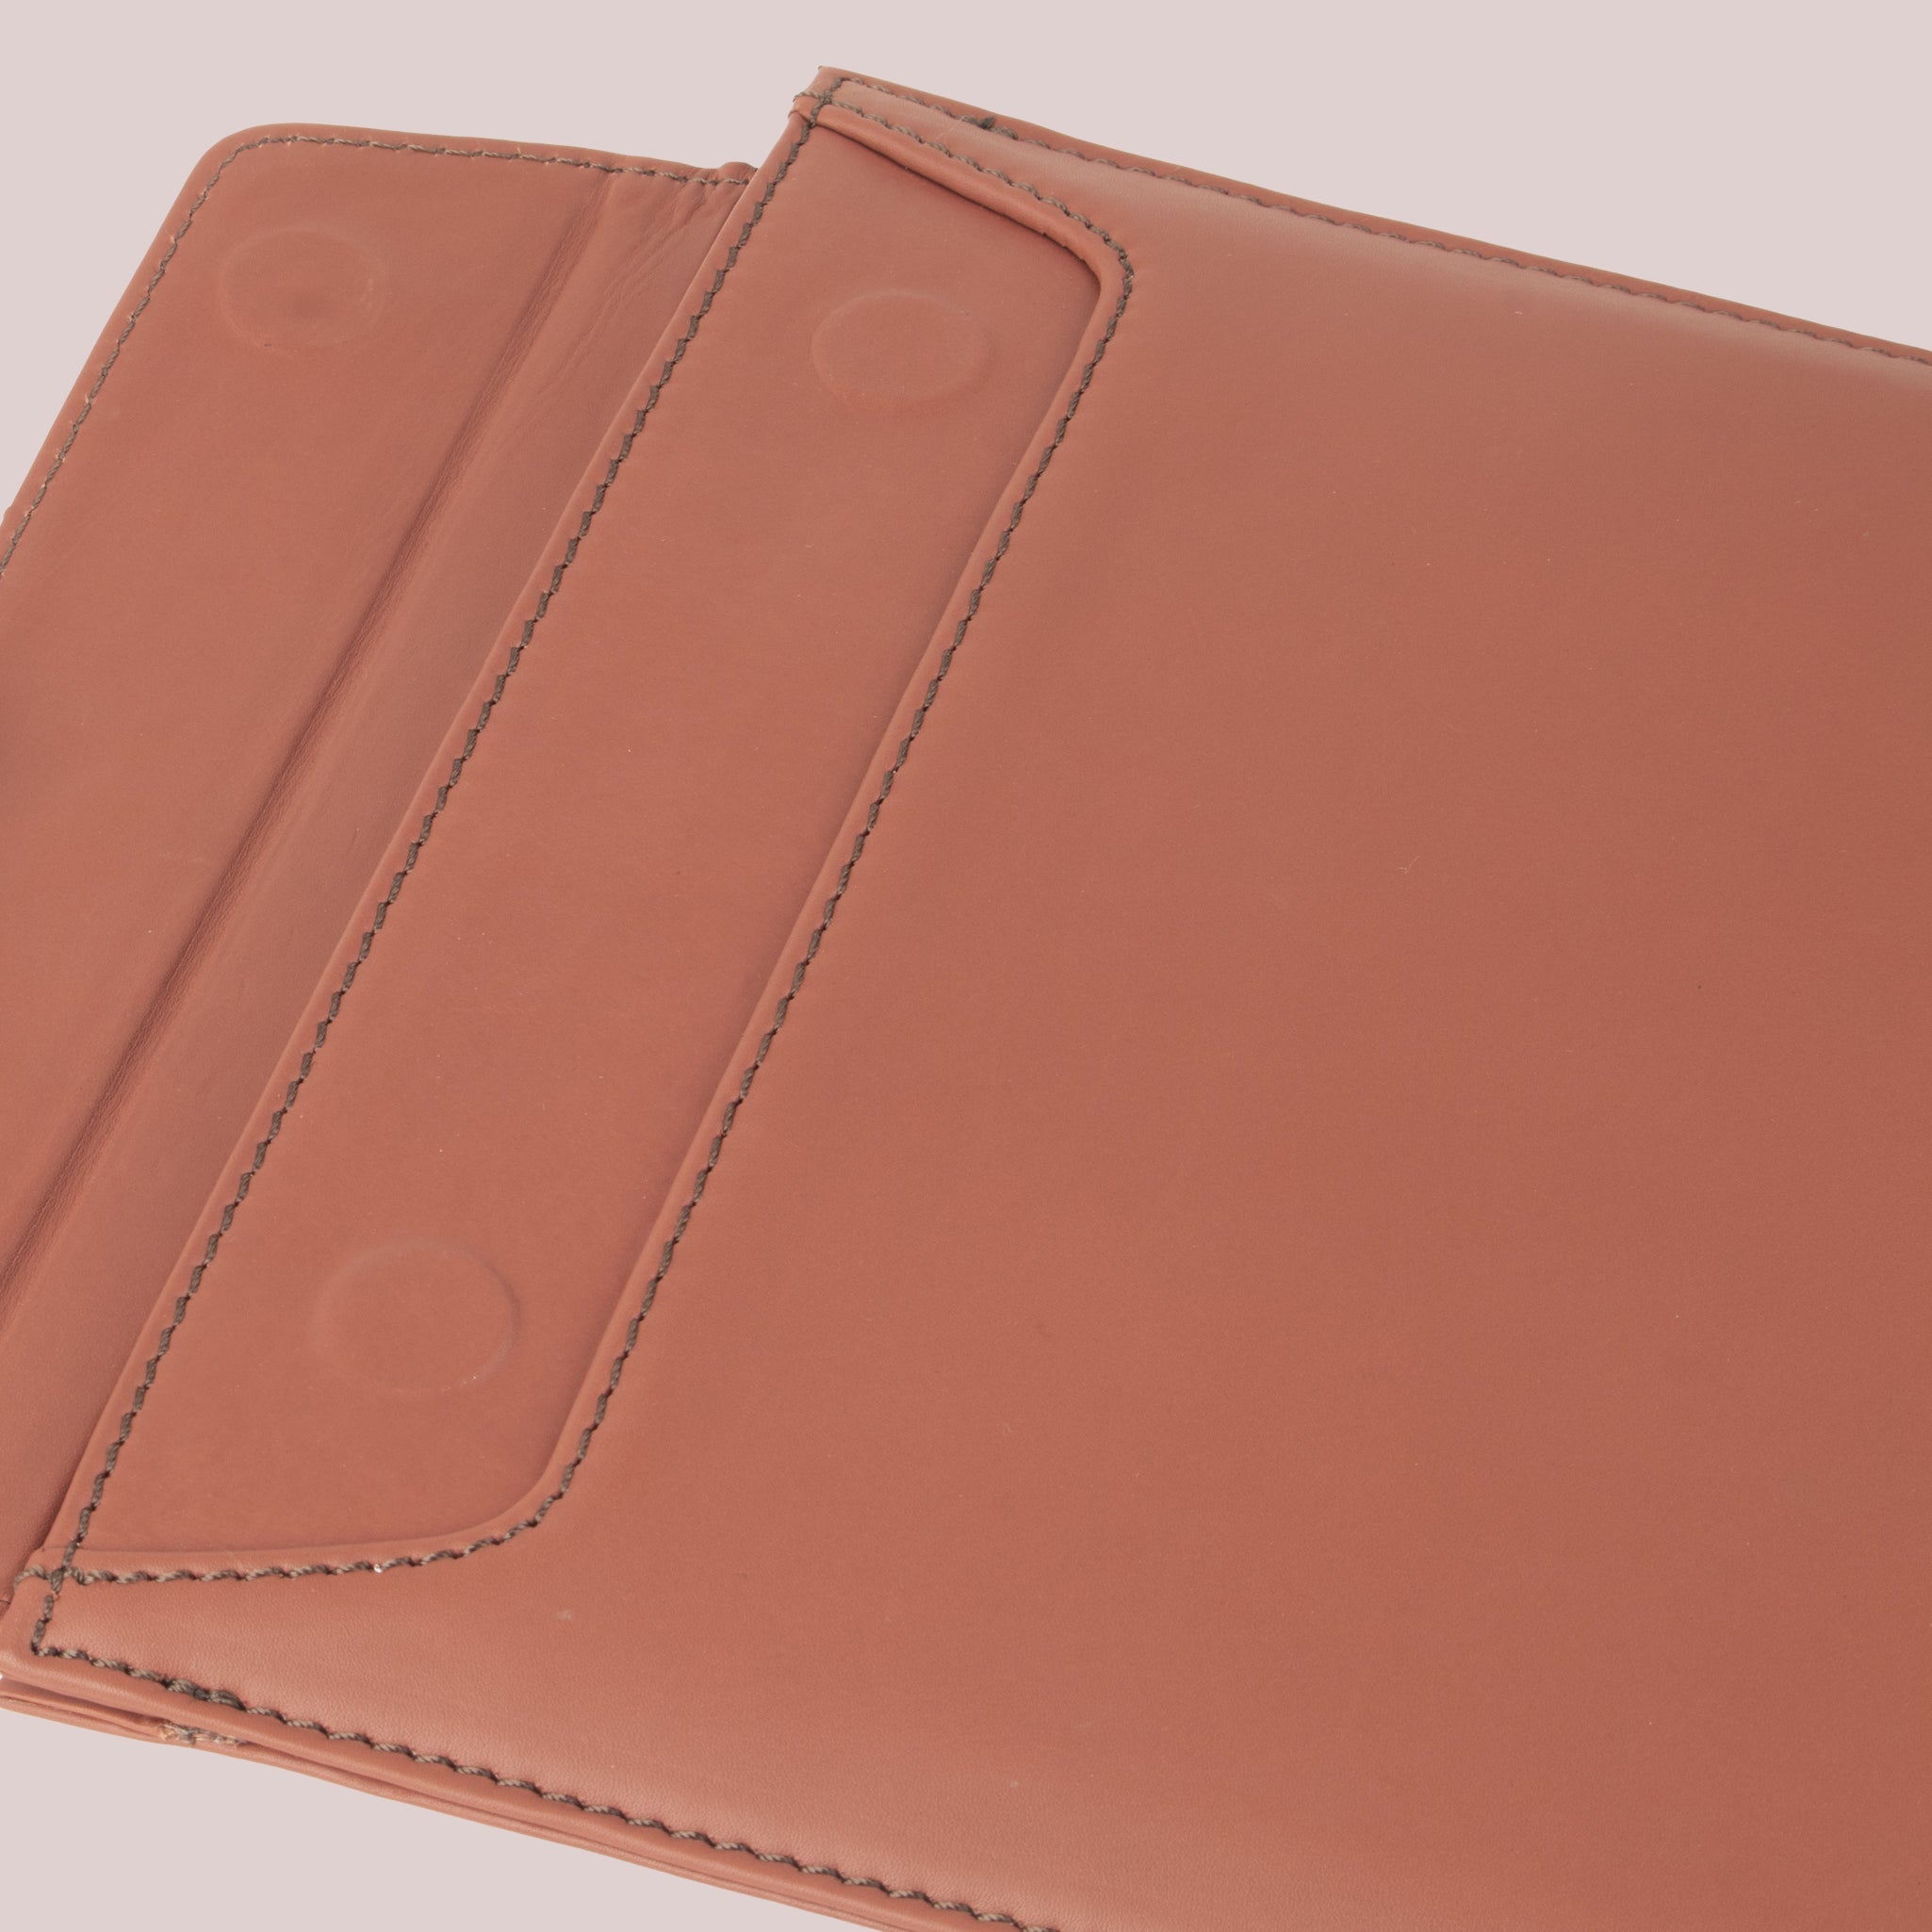 Purchase online Macbook leather sleeve in a stylish brown color